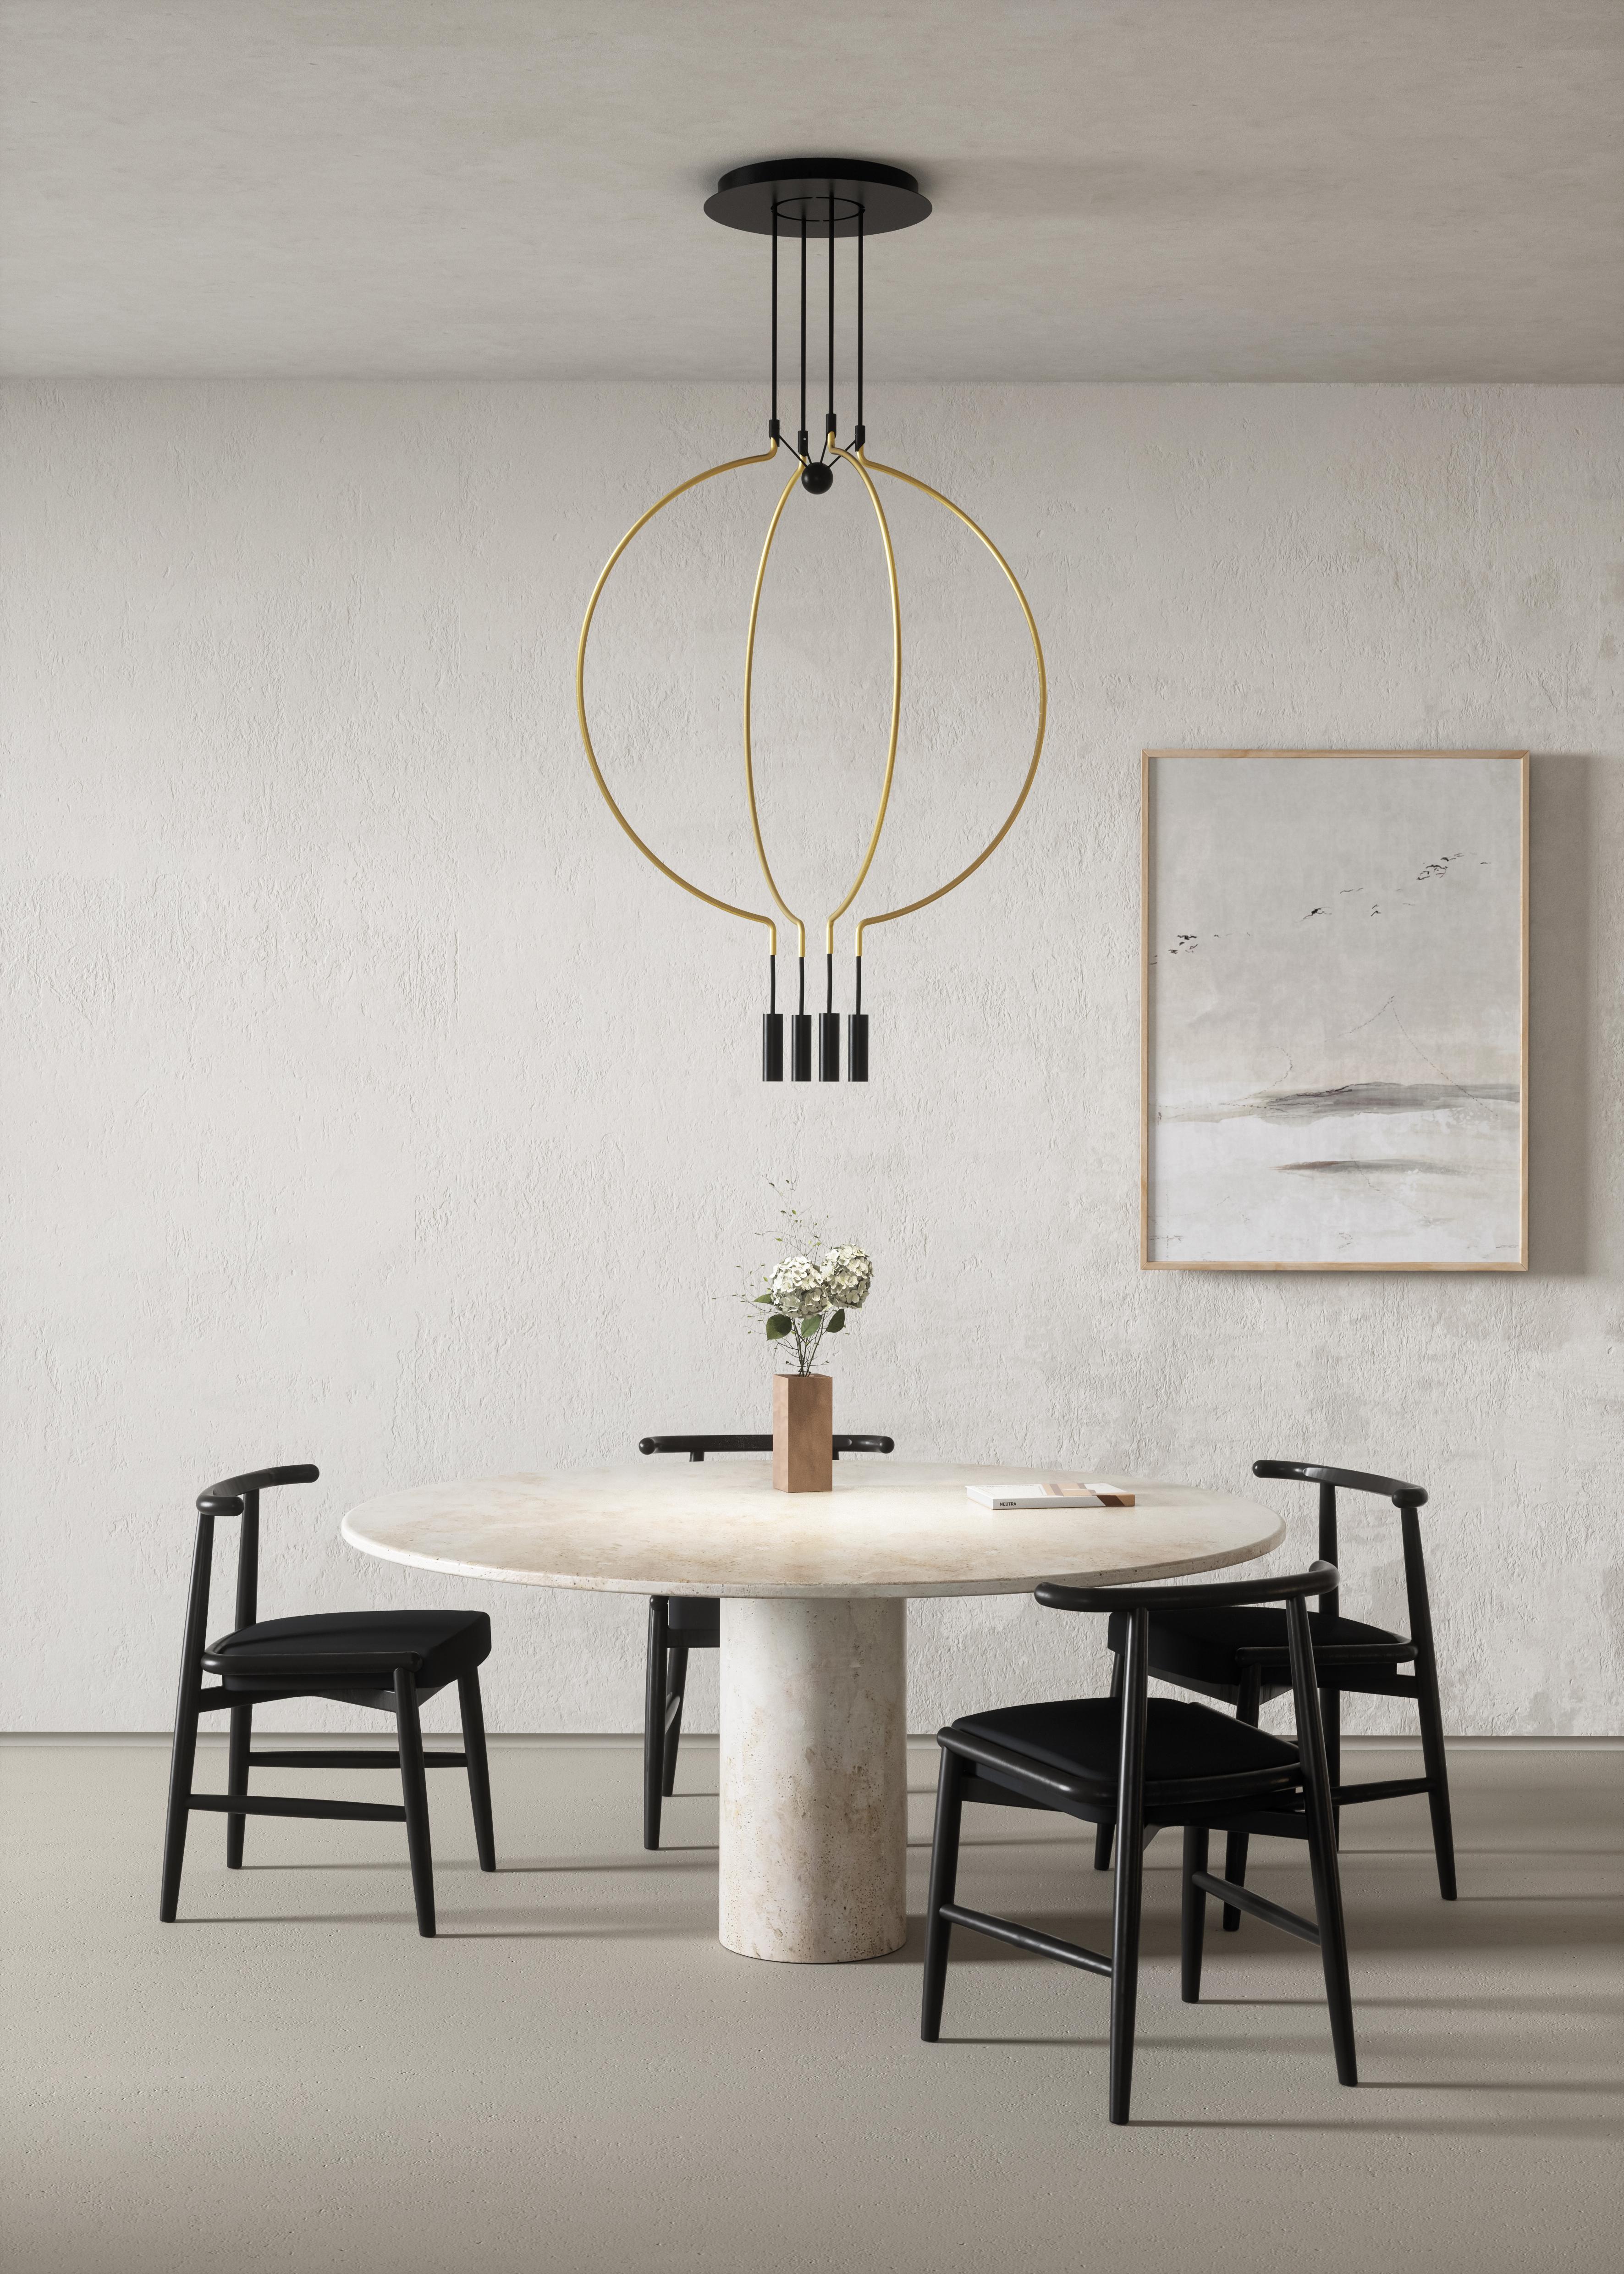 Axolight Liaison Model M4 Pendant Lamp in Black/Gold by Sara Moroni

Modular lightness and elegance. Liaison tells about the perfect balance of three geometric archetypes: sphere, circle and cylinder compose a system that includes the single pendant